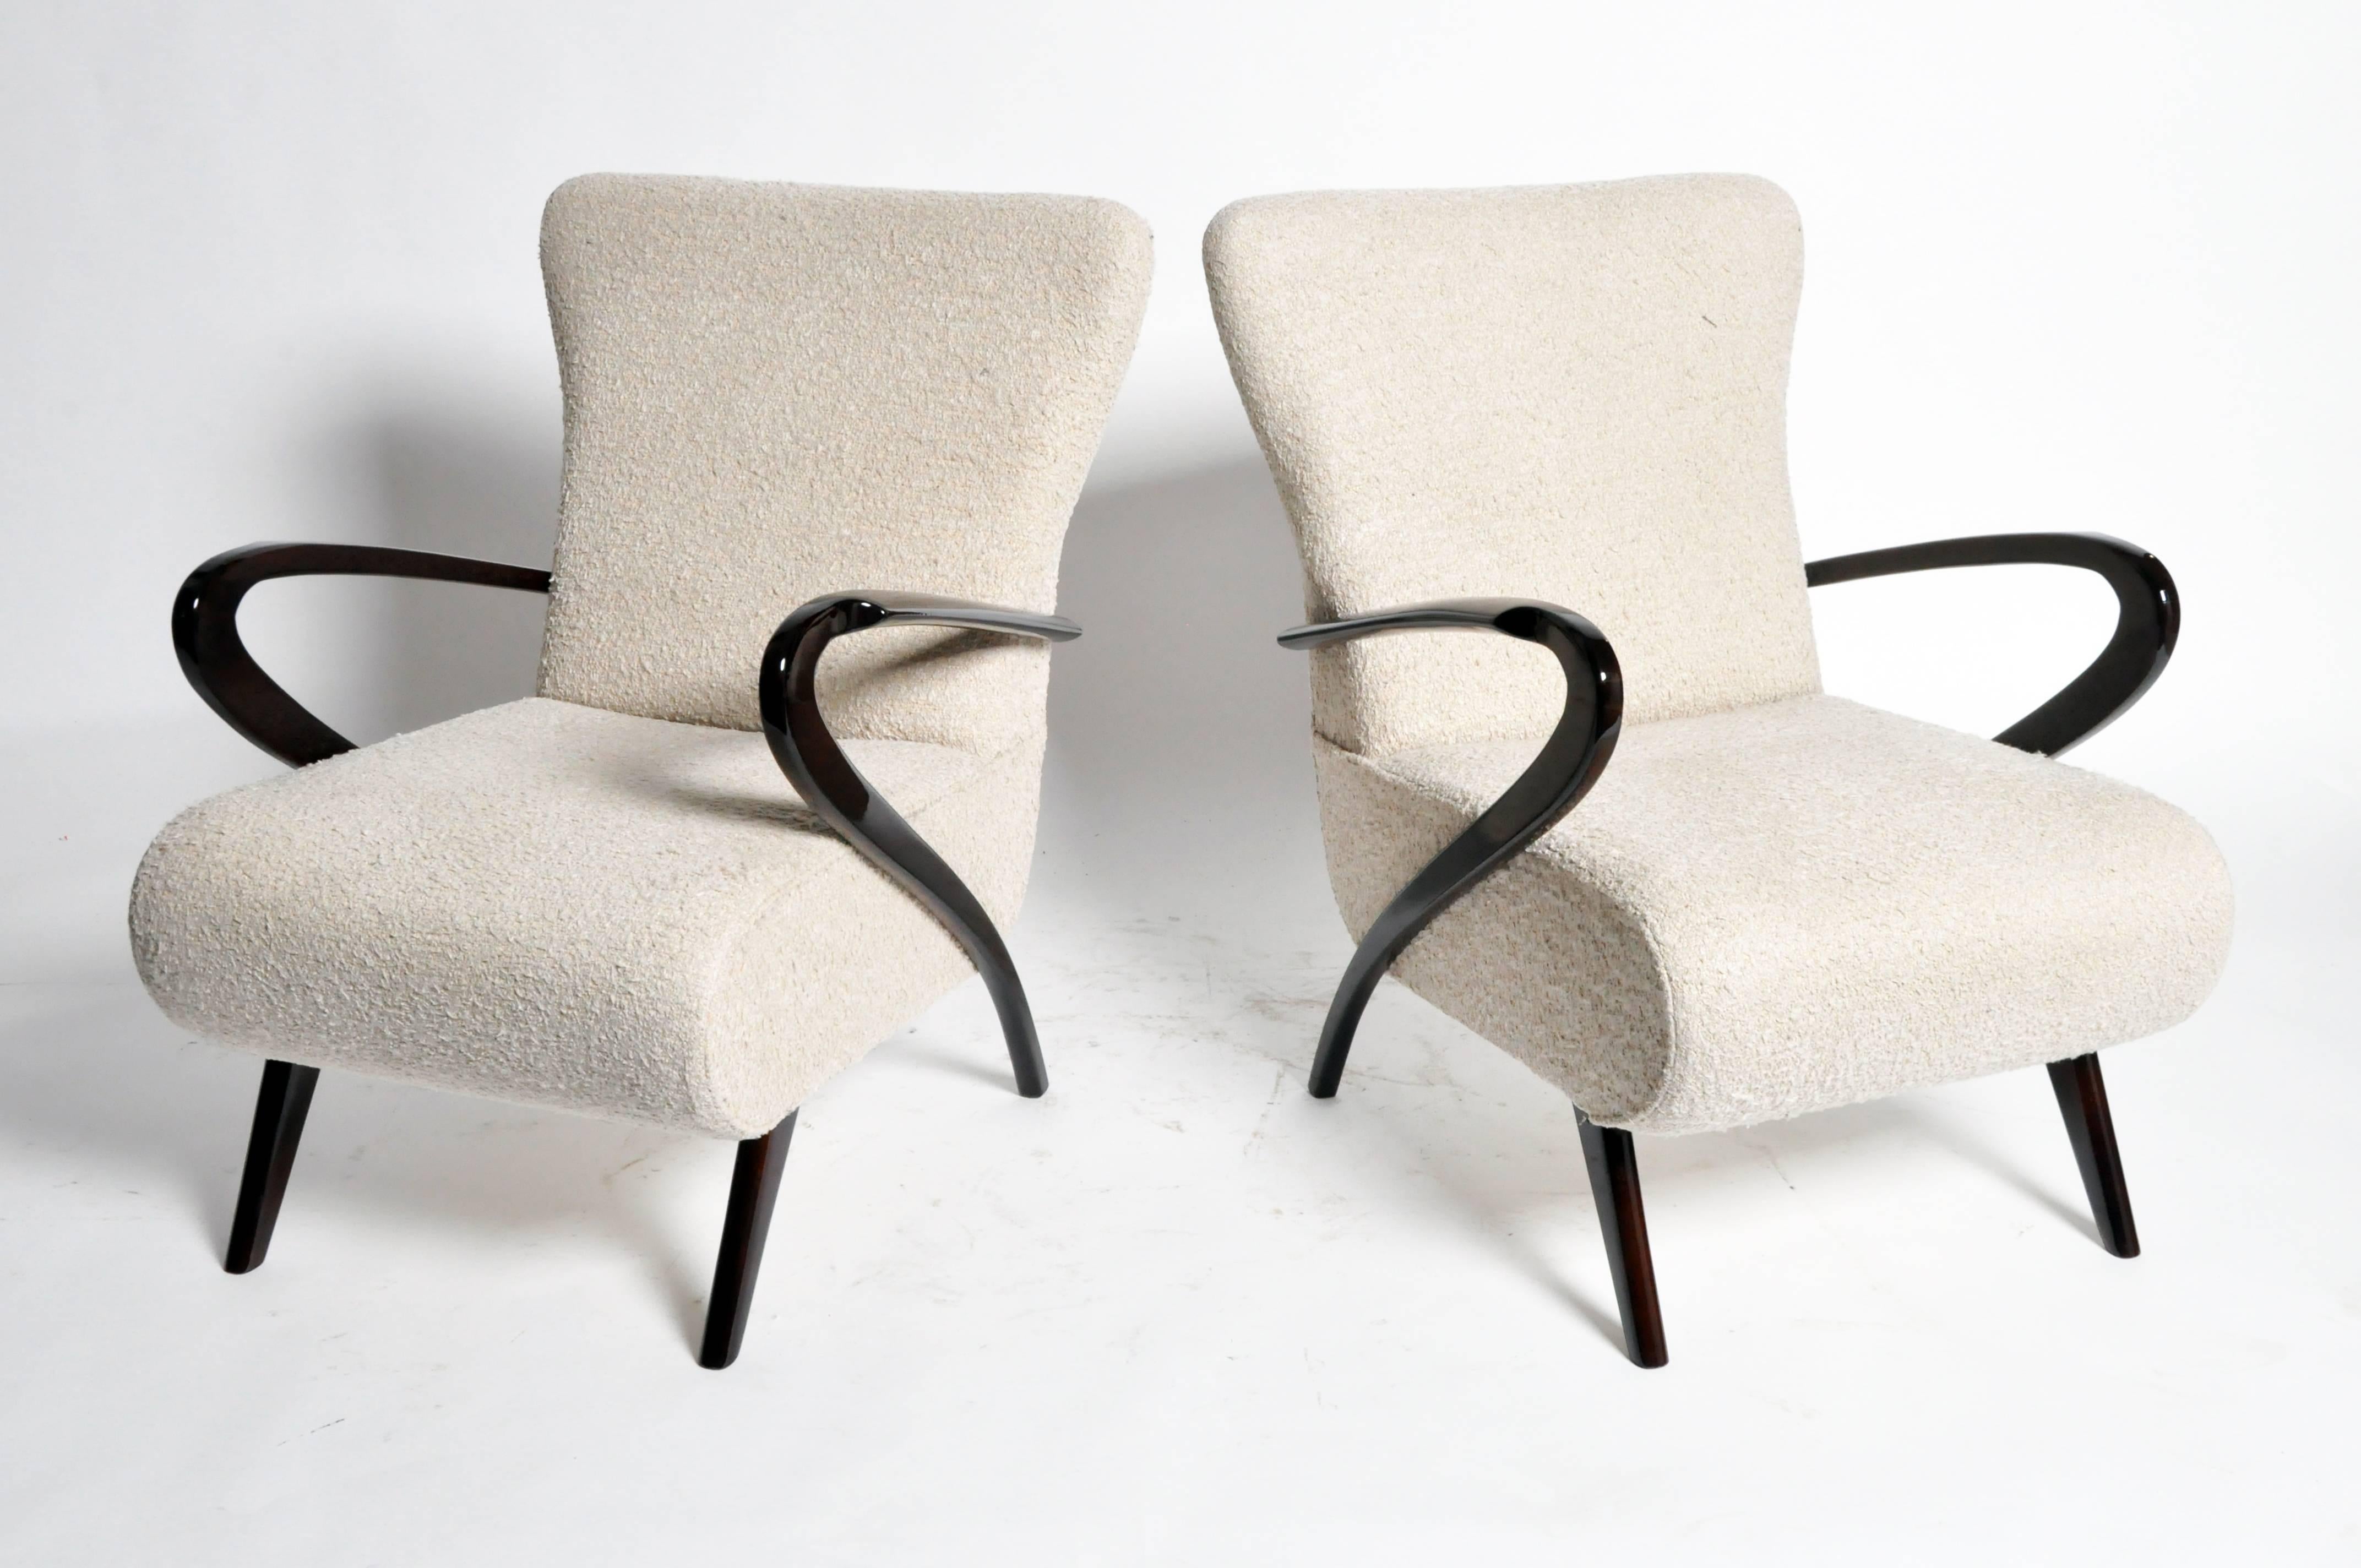 This stylish pair of Italian chairs features a winning combination of sleek, sculptural elements and bold, modernist design. Arms are finished in a pristinely polished, black walnut veneer. Ample seating in lambskin upholstery contributes to a fun,